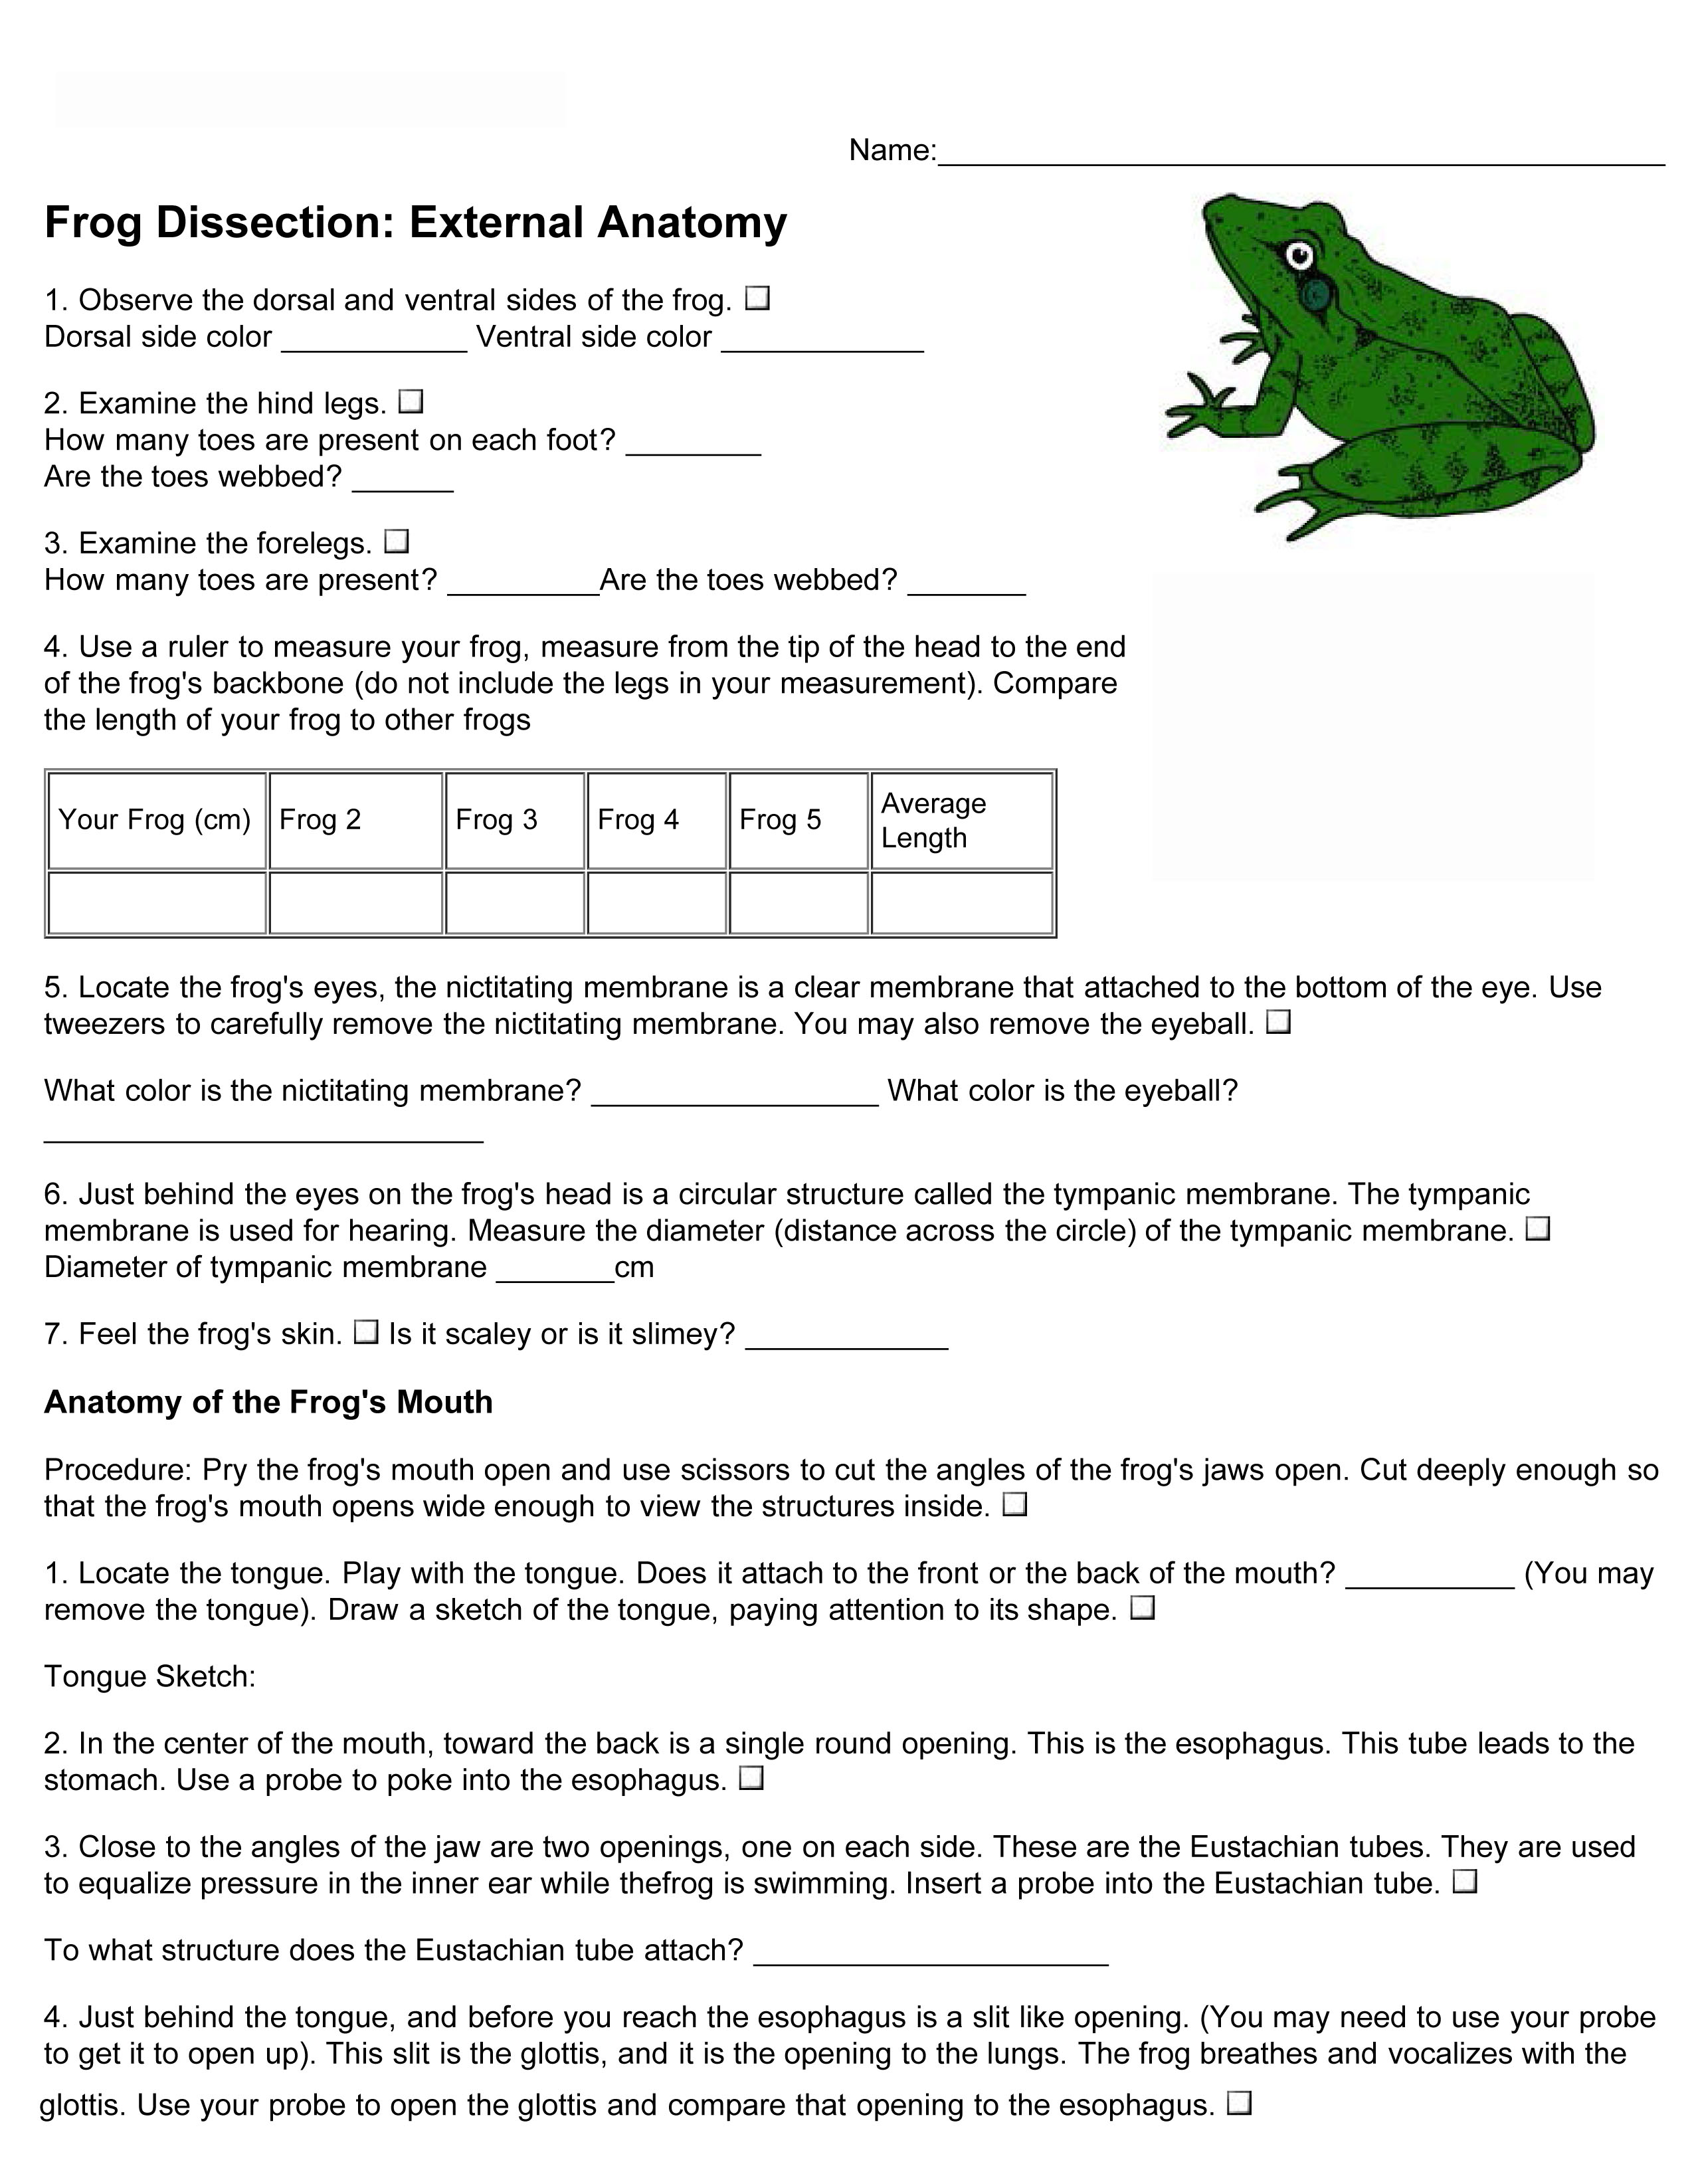 Frog Dissection External Anatomy - Anatomy Drawing Diagram Throughout Frog Dissection Worksheet Answer Key